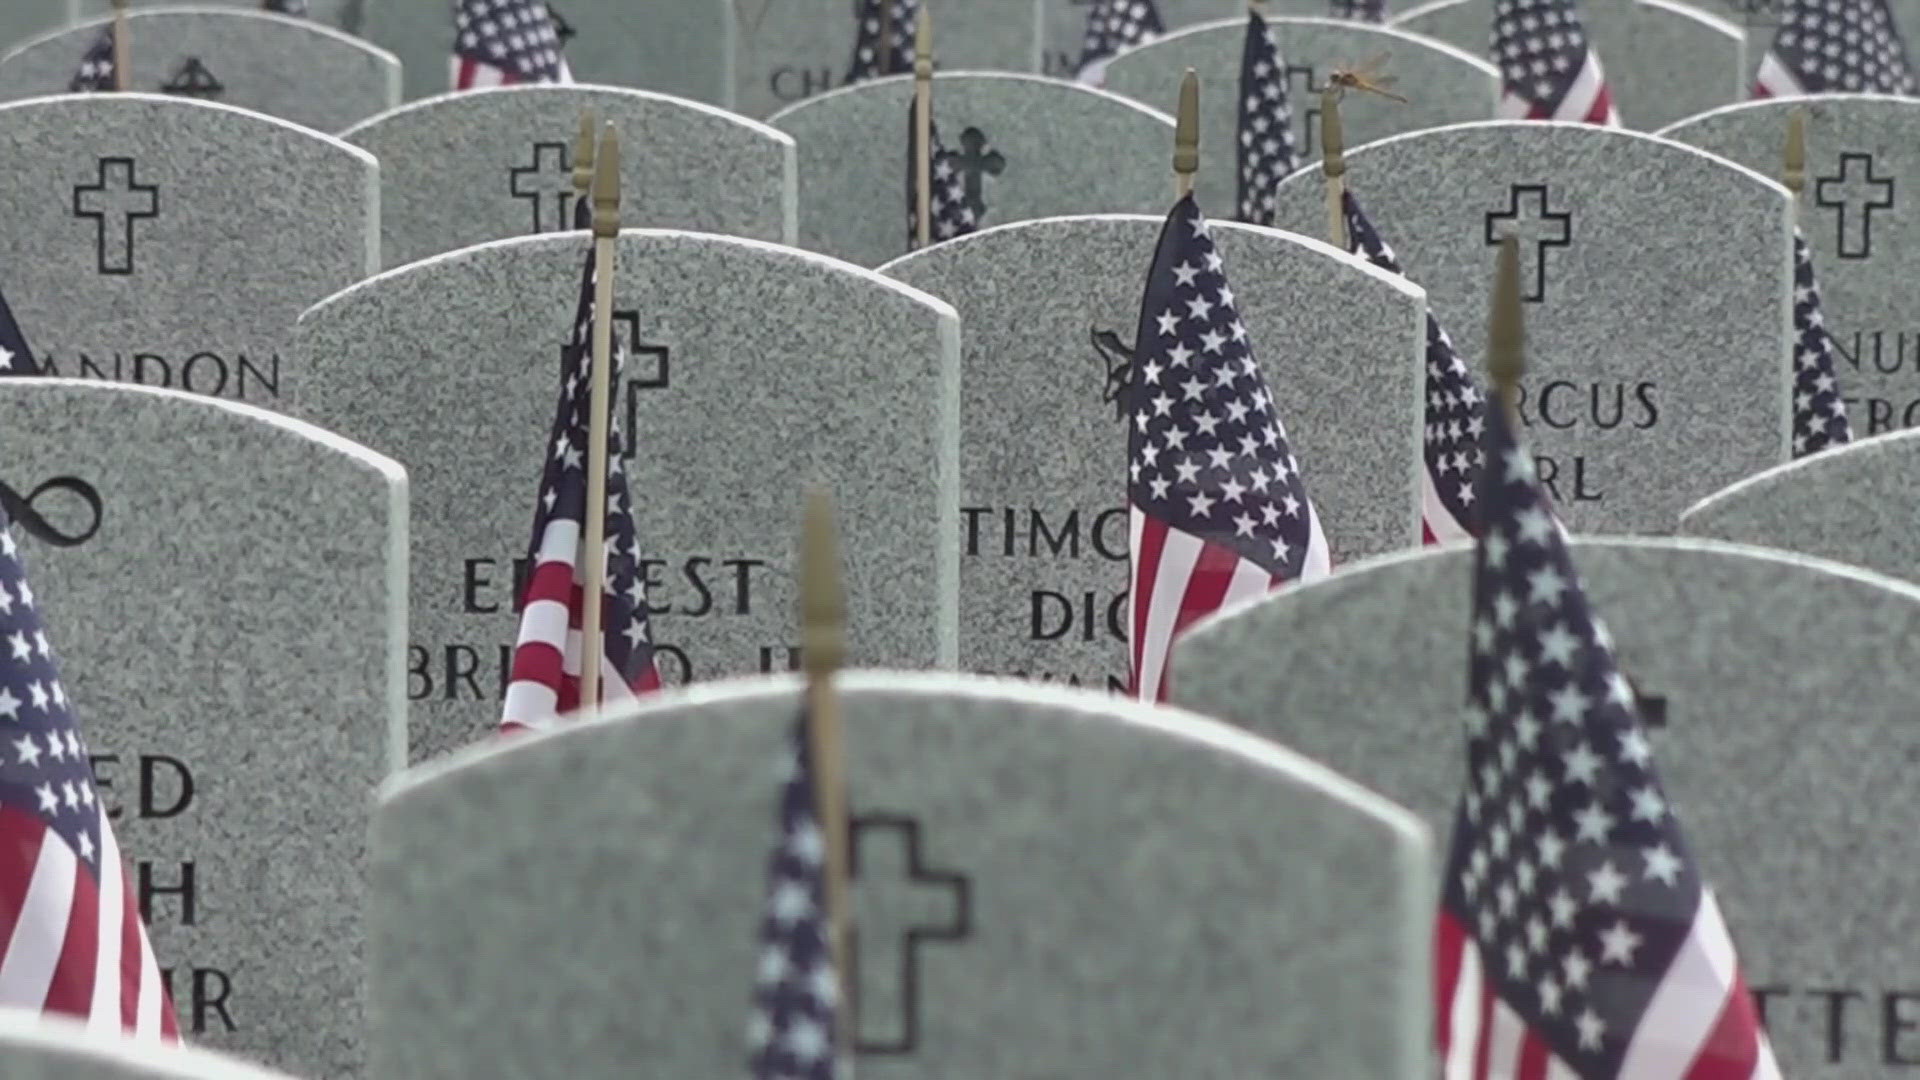 As we honor those who made the ultimate sacrifice, there are several ways to pay your respects this Memorial Day.